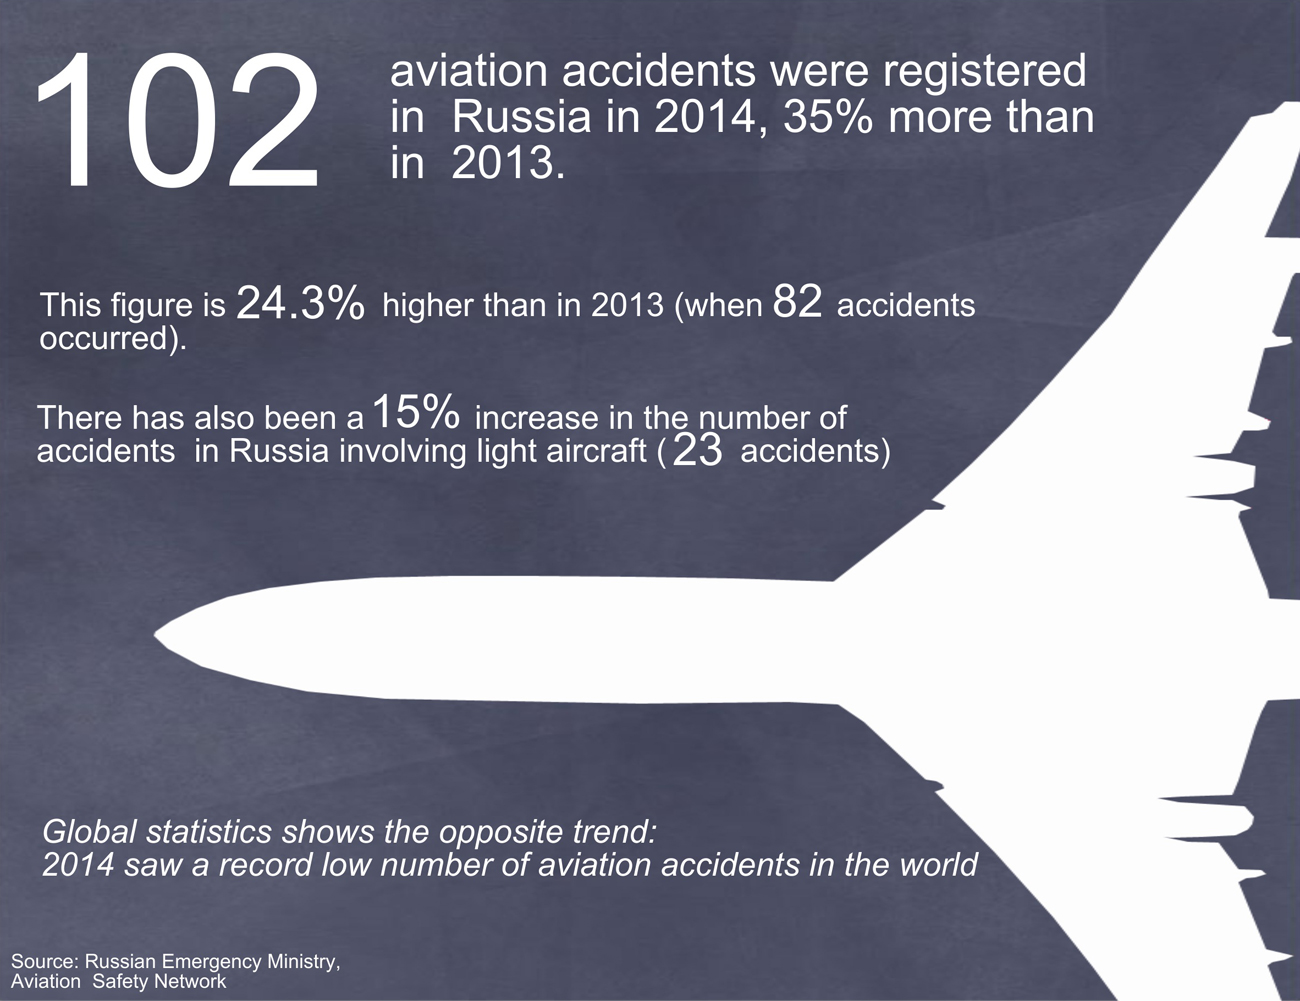 Russia’s skies became 24% less safe in 2014 than in the previous year